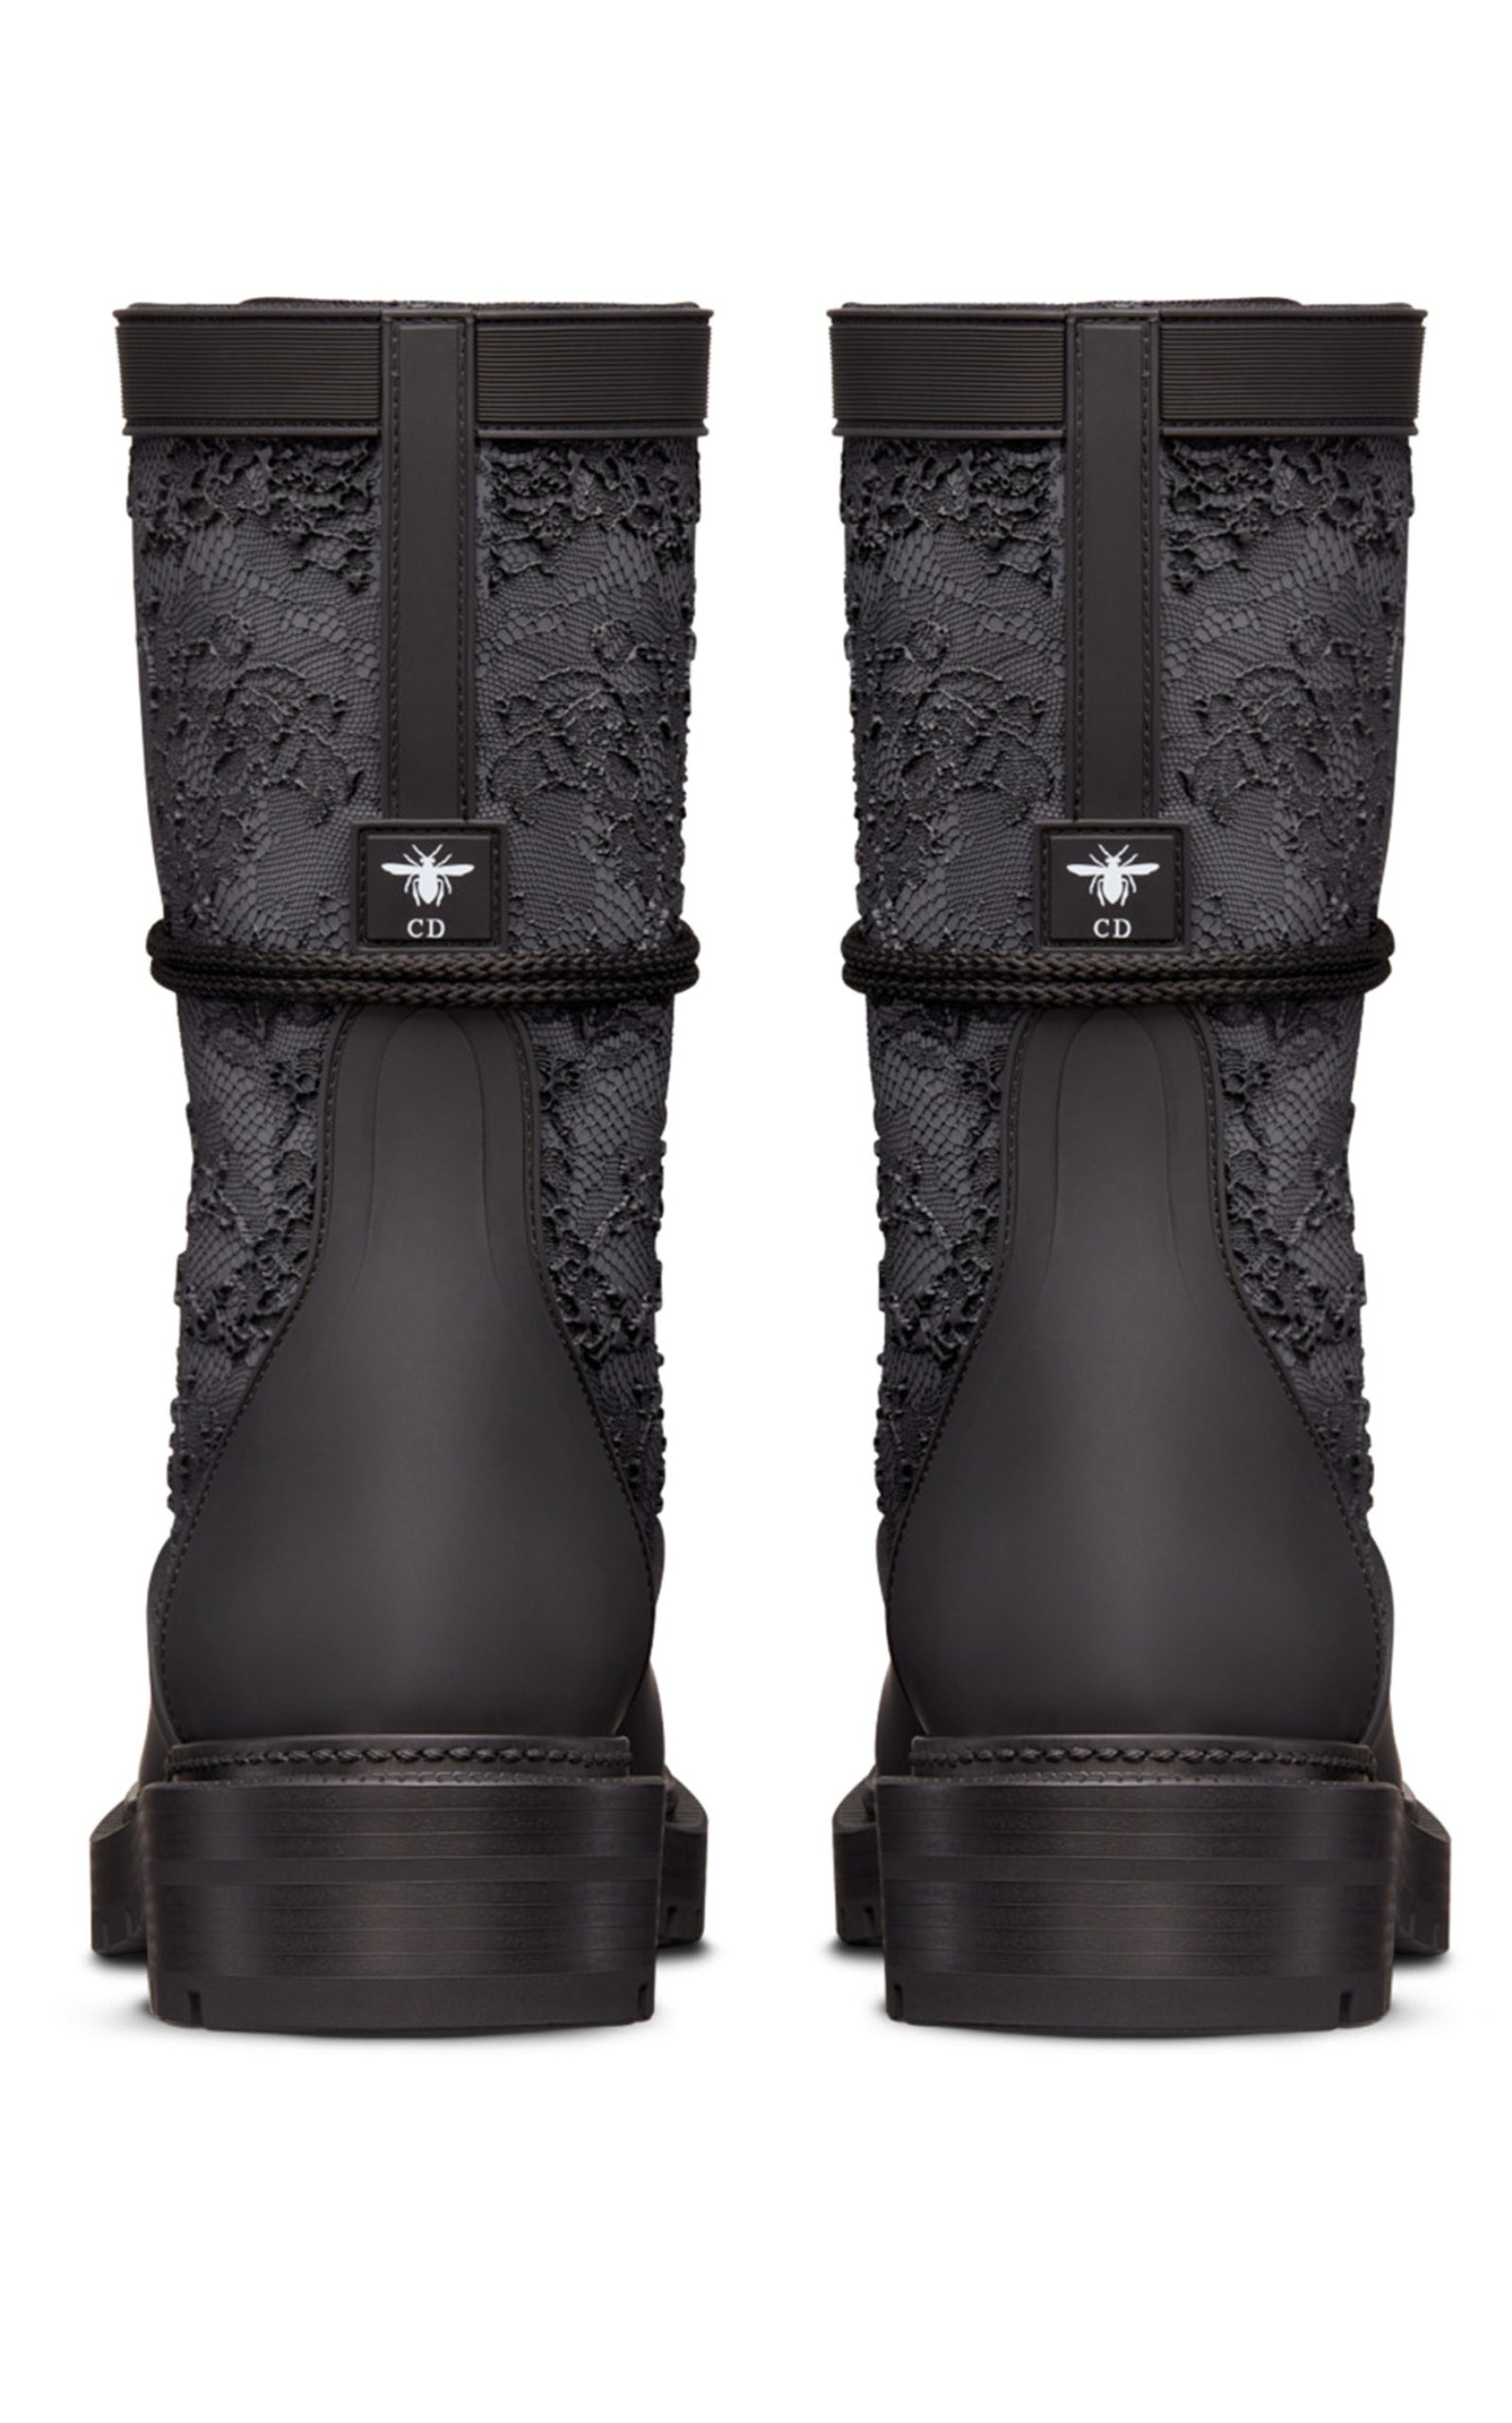 Urban-D Ankle Boots - 4